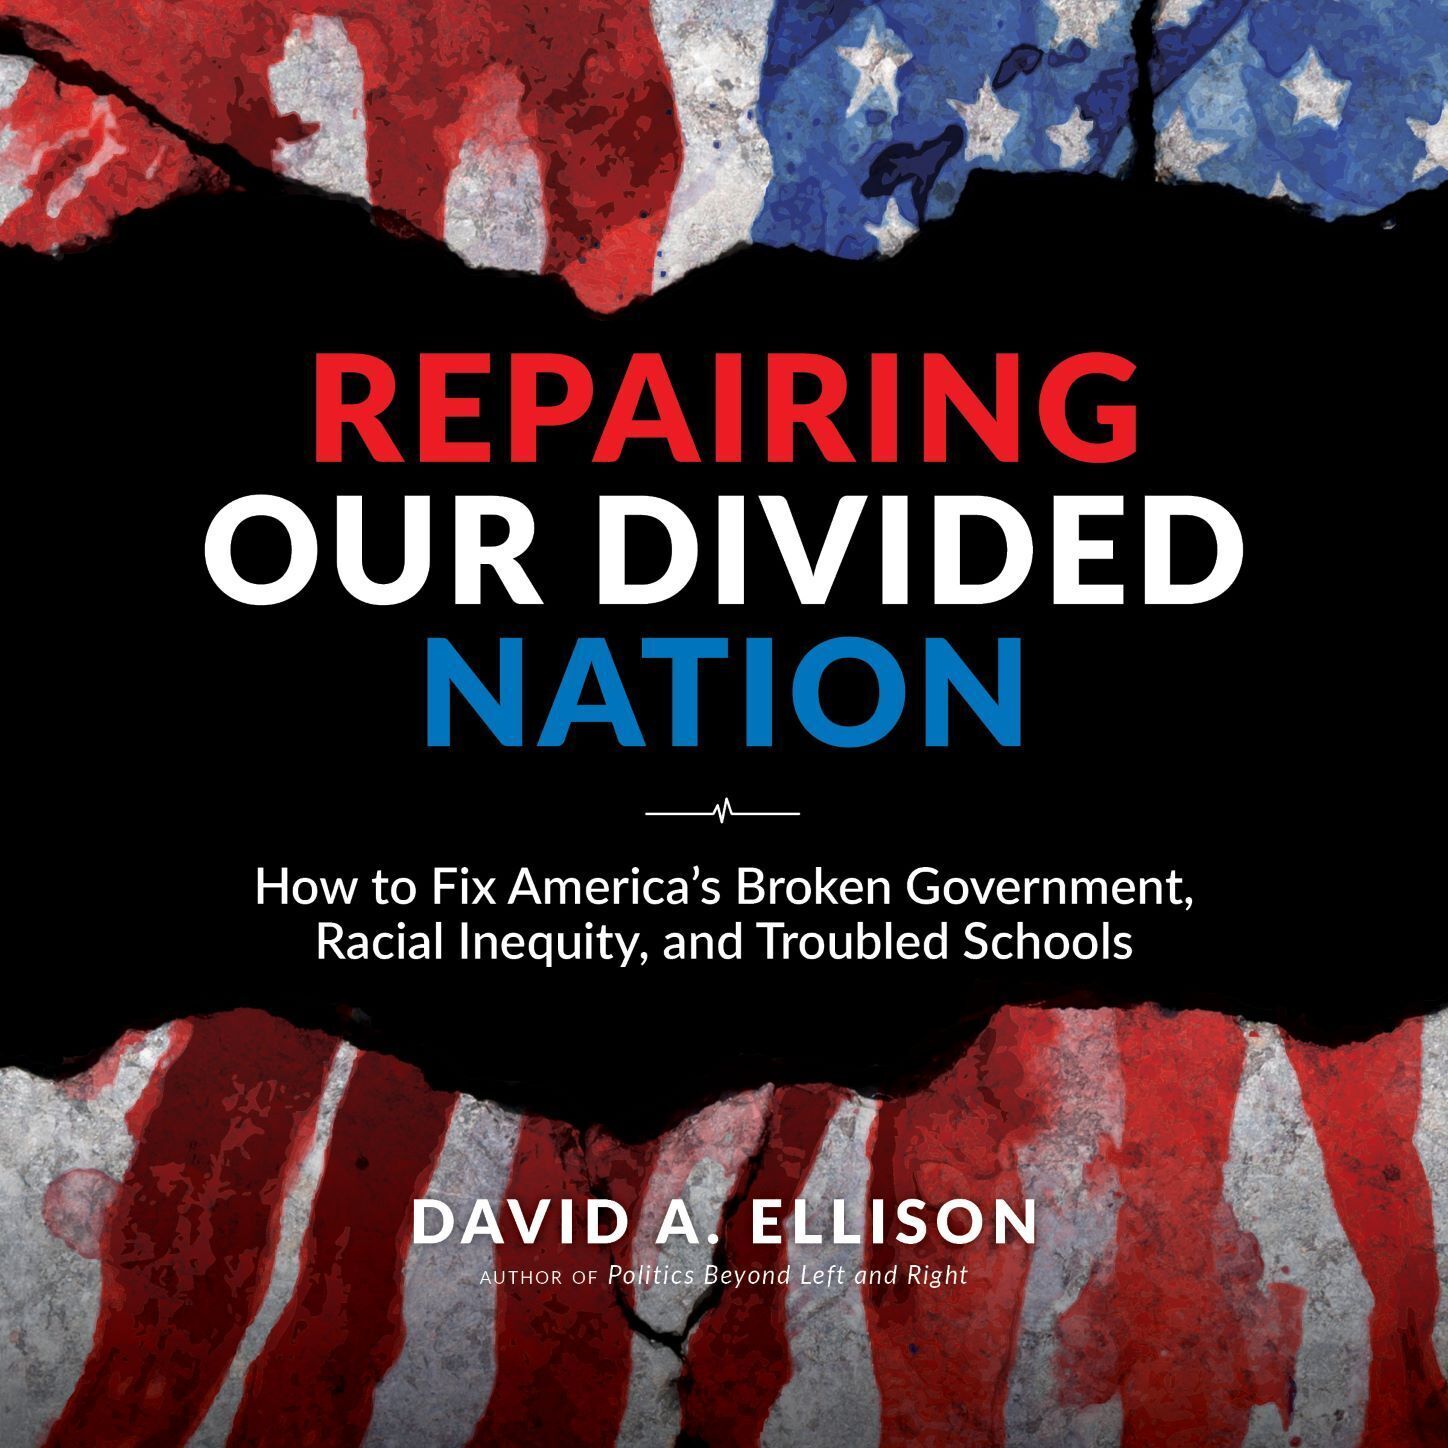 Interview with Dave Ellison. Author of "Repairing Our Divided Nation"